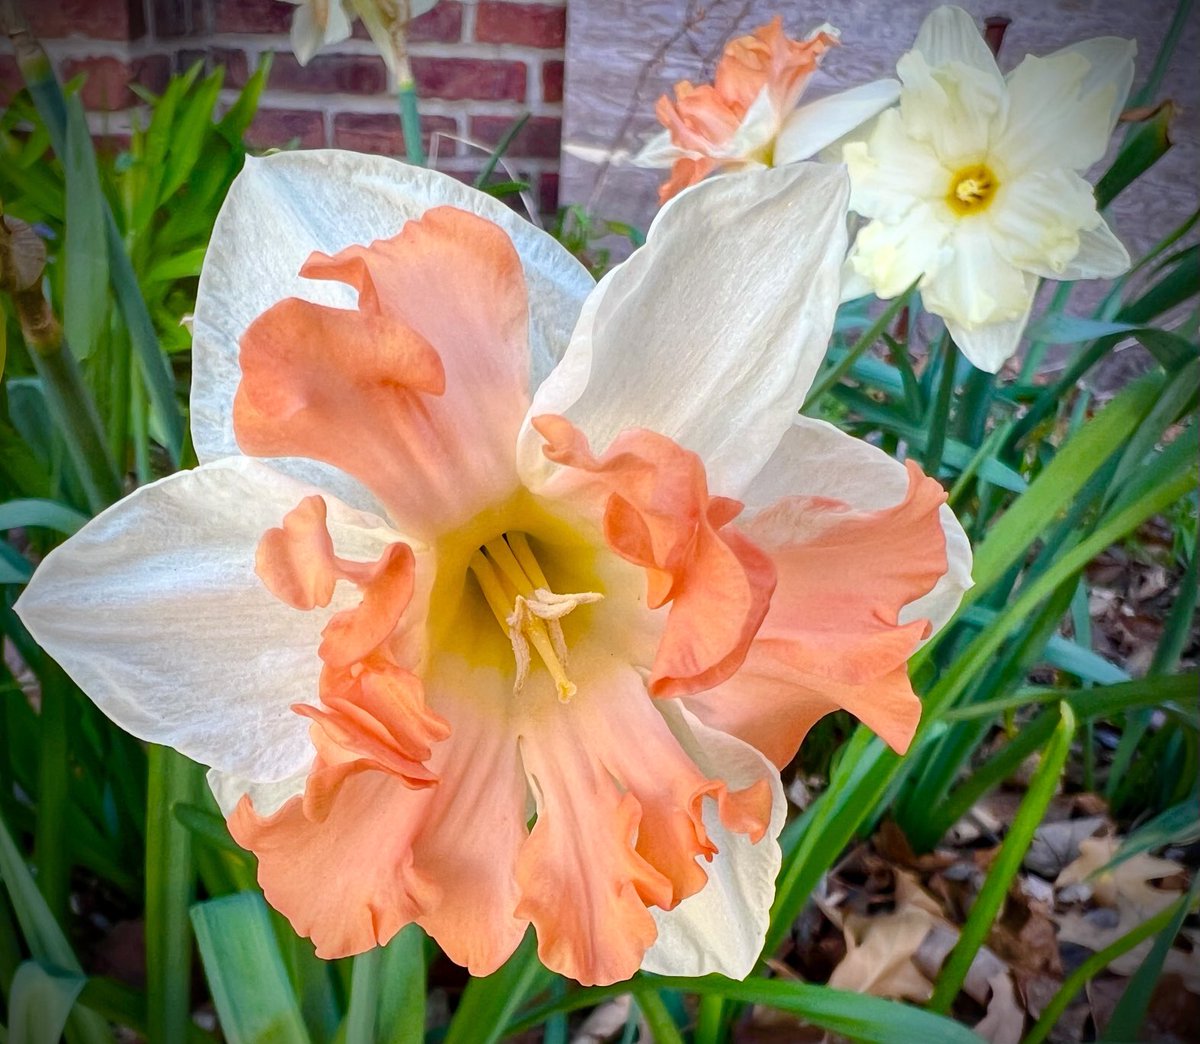 Squeeee! Spring is on the way! Found my neighbor, Miss E., in her flower garden this evening, working on her watercolors——is this a cheery sight or what? 😃🌸🌼🌺